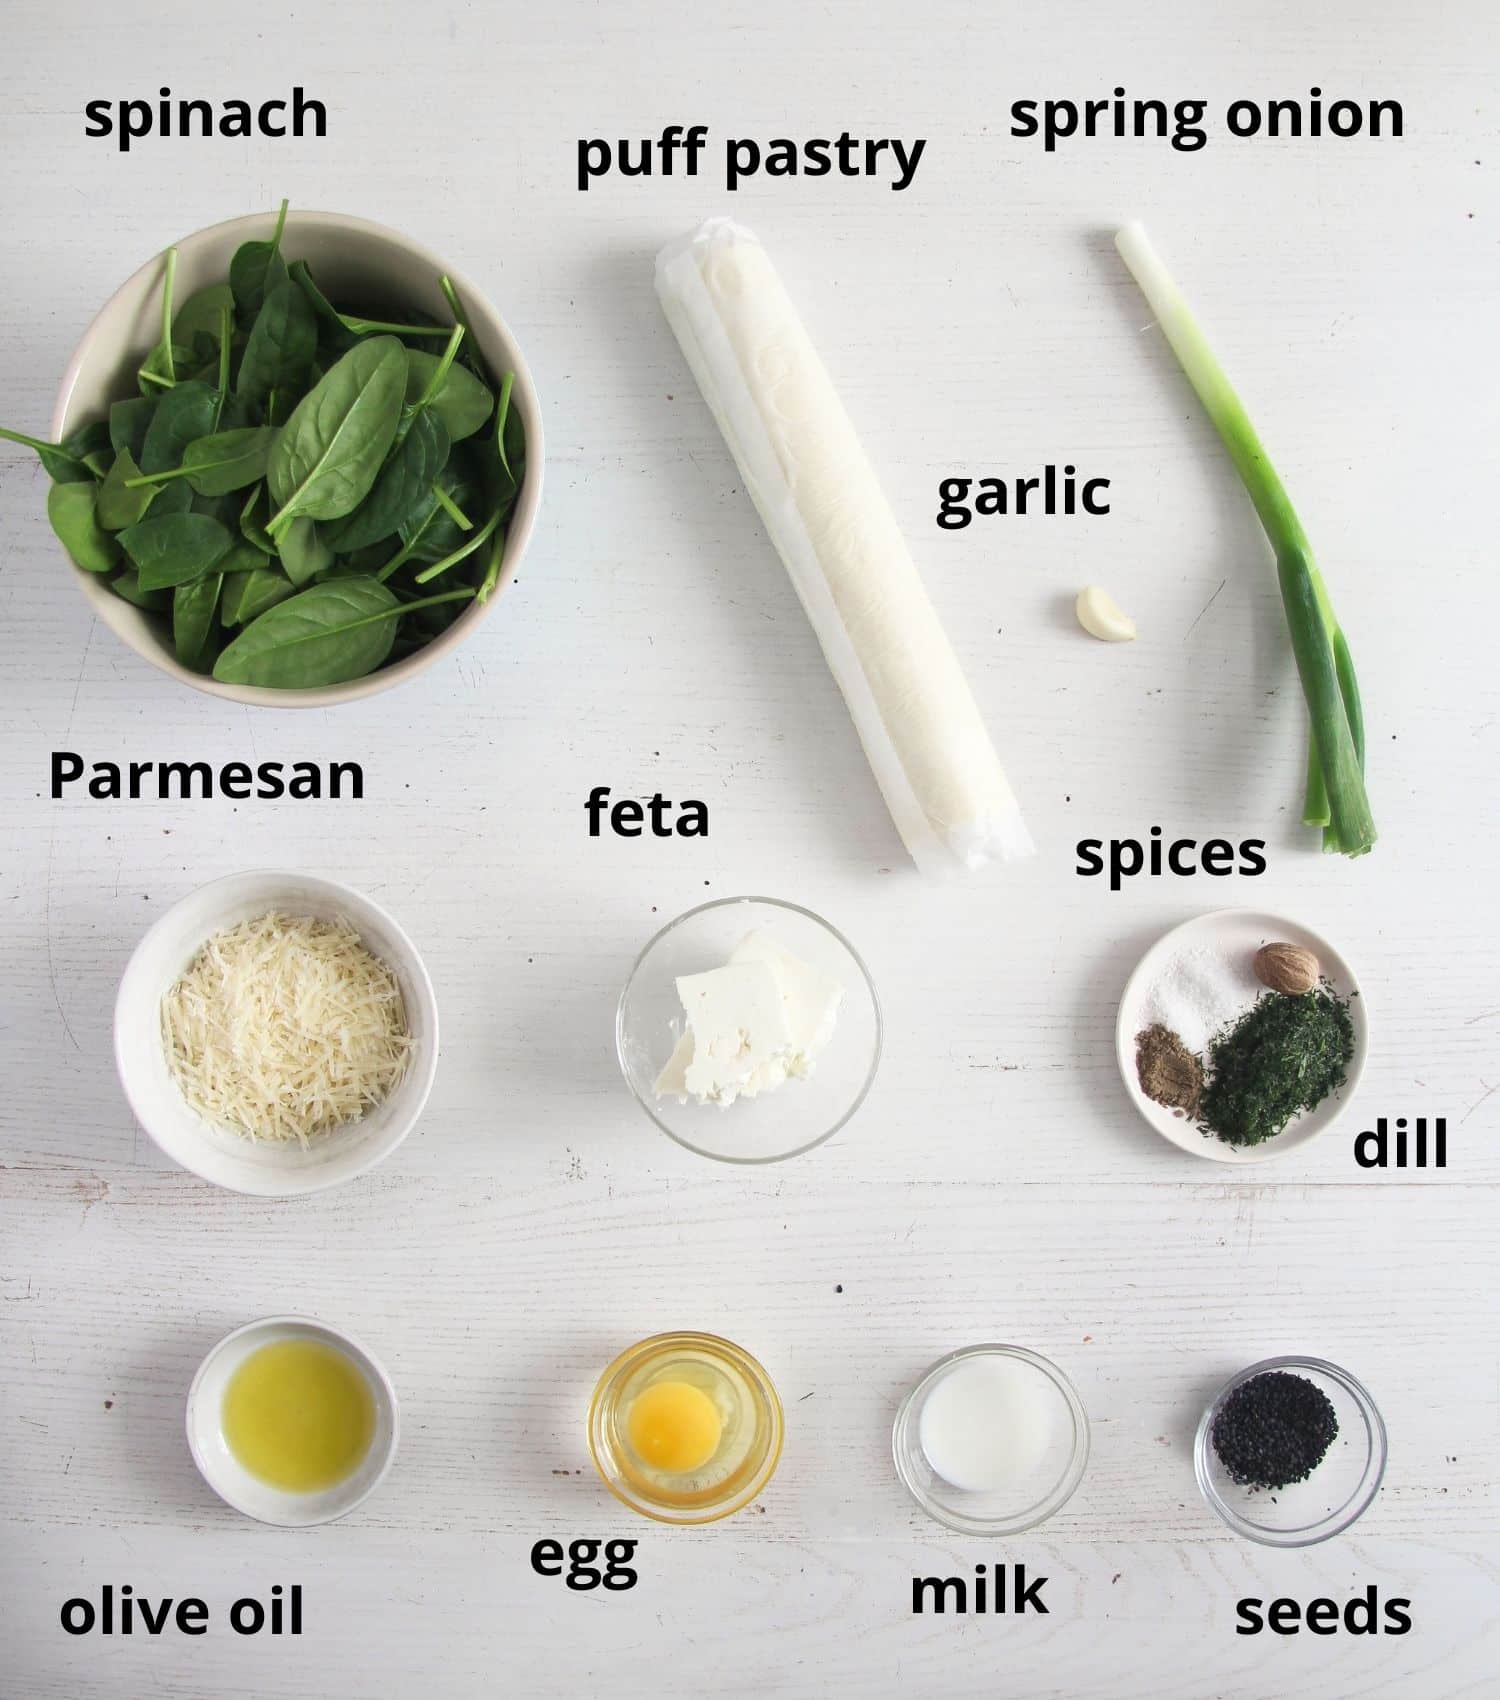 listed ingredients for making cheese and spinach triangles on the table.